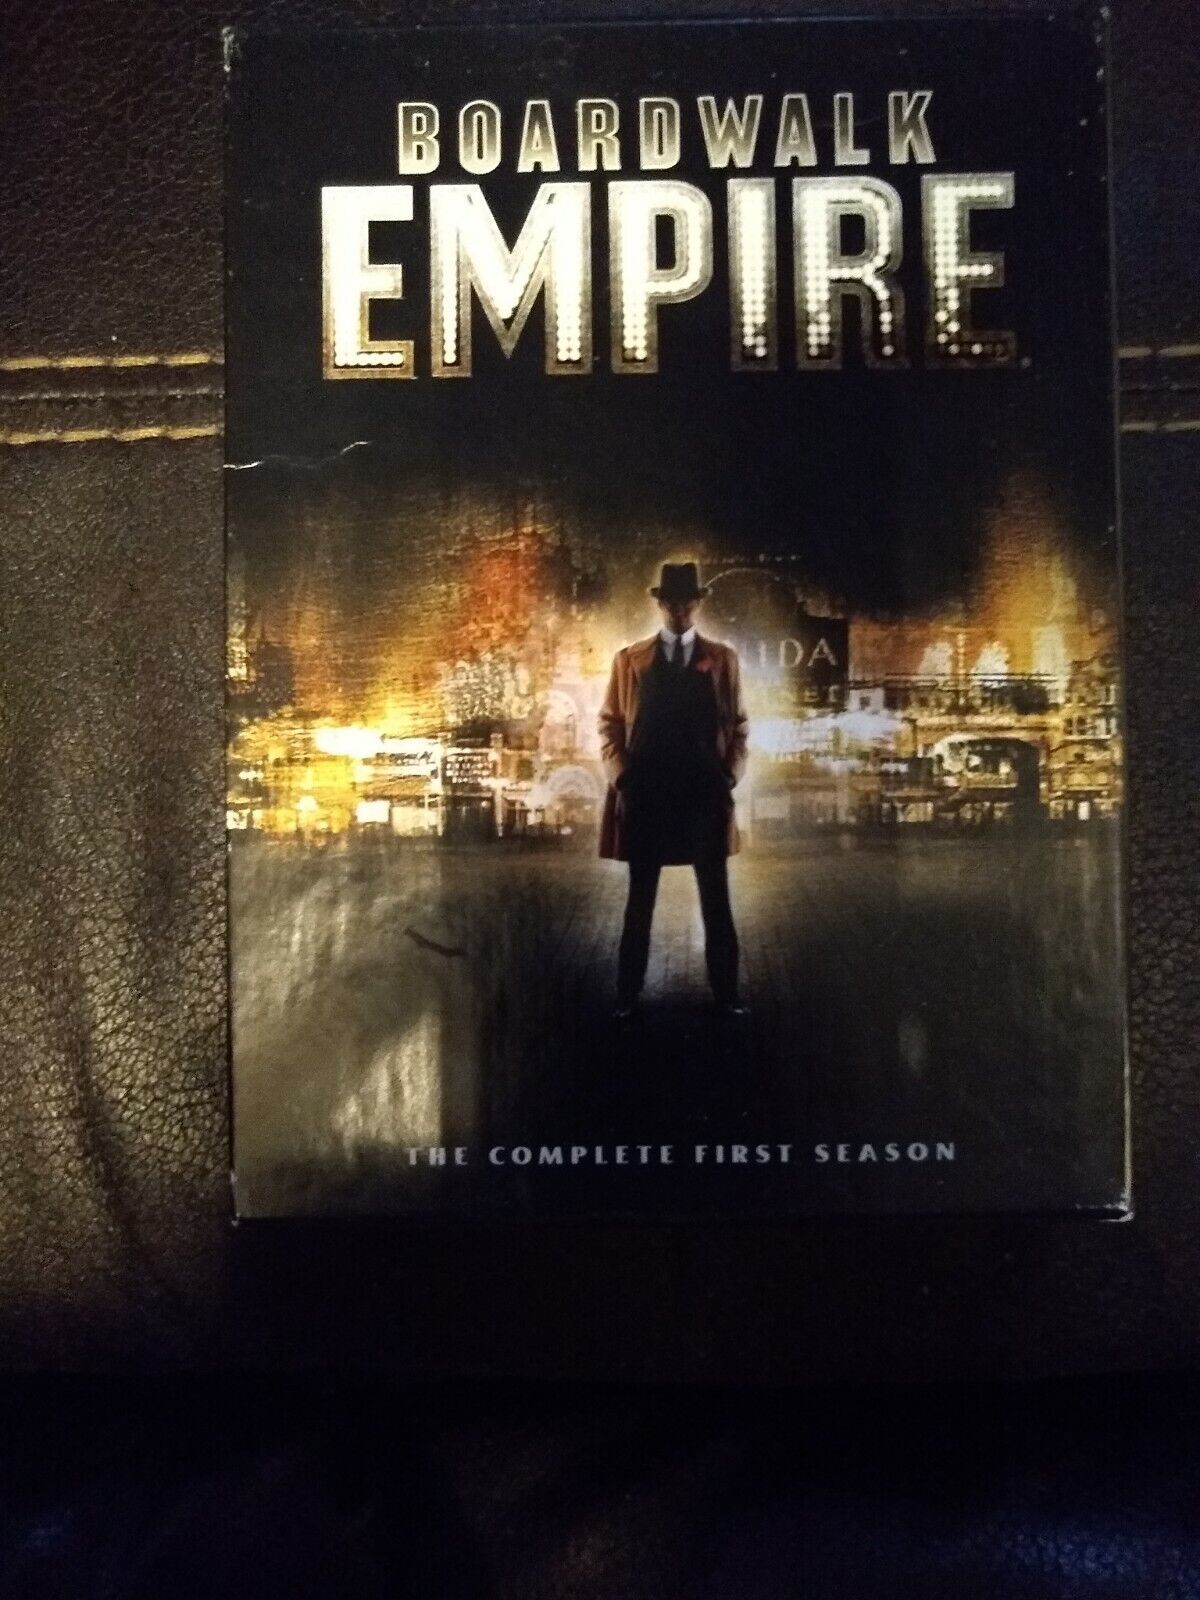 Primary image for Boardwalk Empire: The Complete First Season (DVD, 2012, 5-Disc Set)